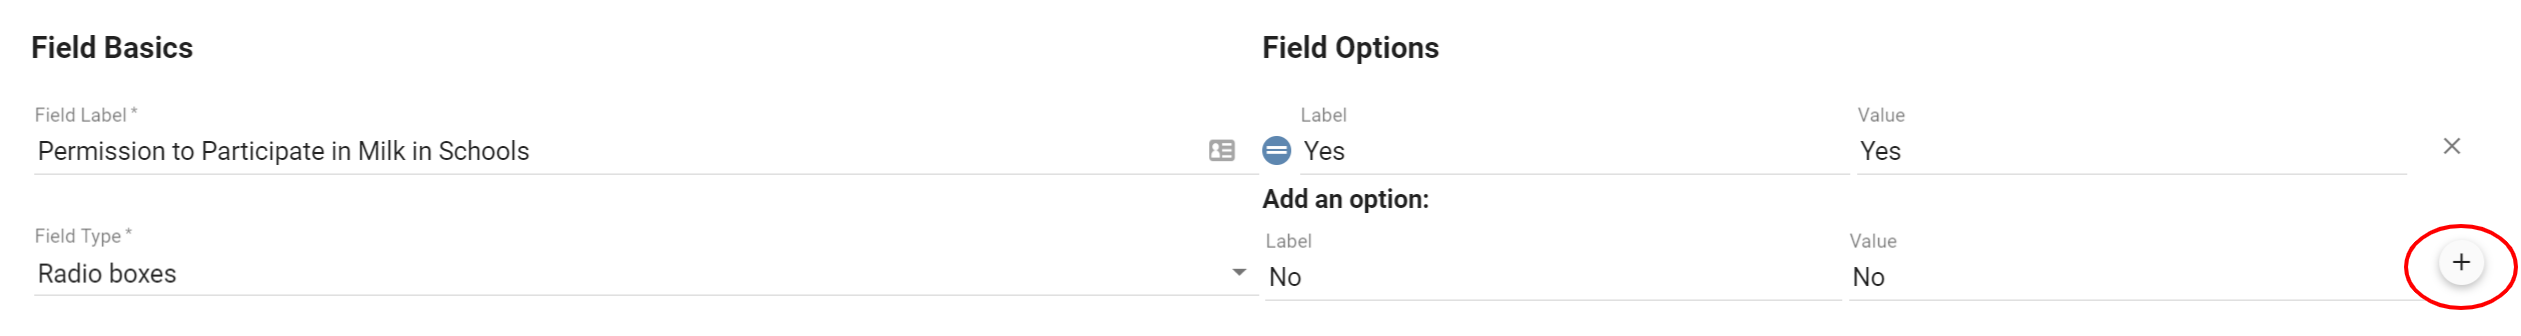 Field_Options.png